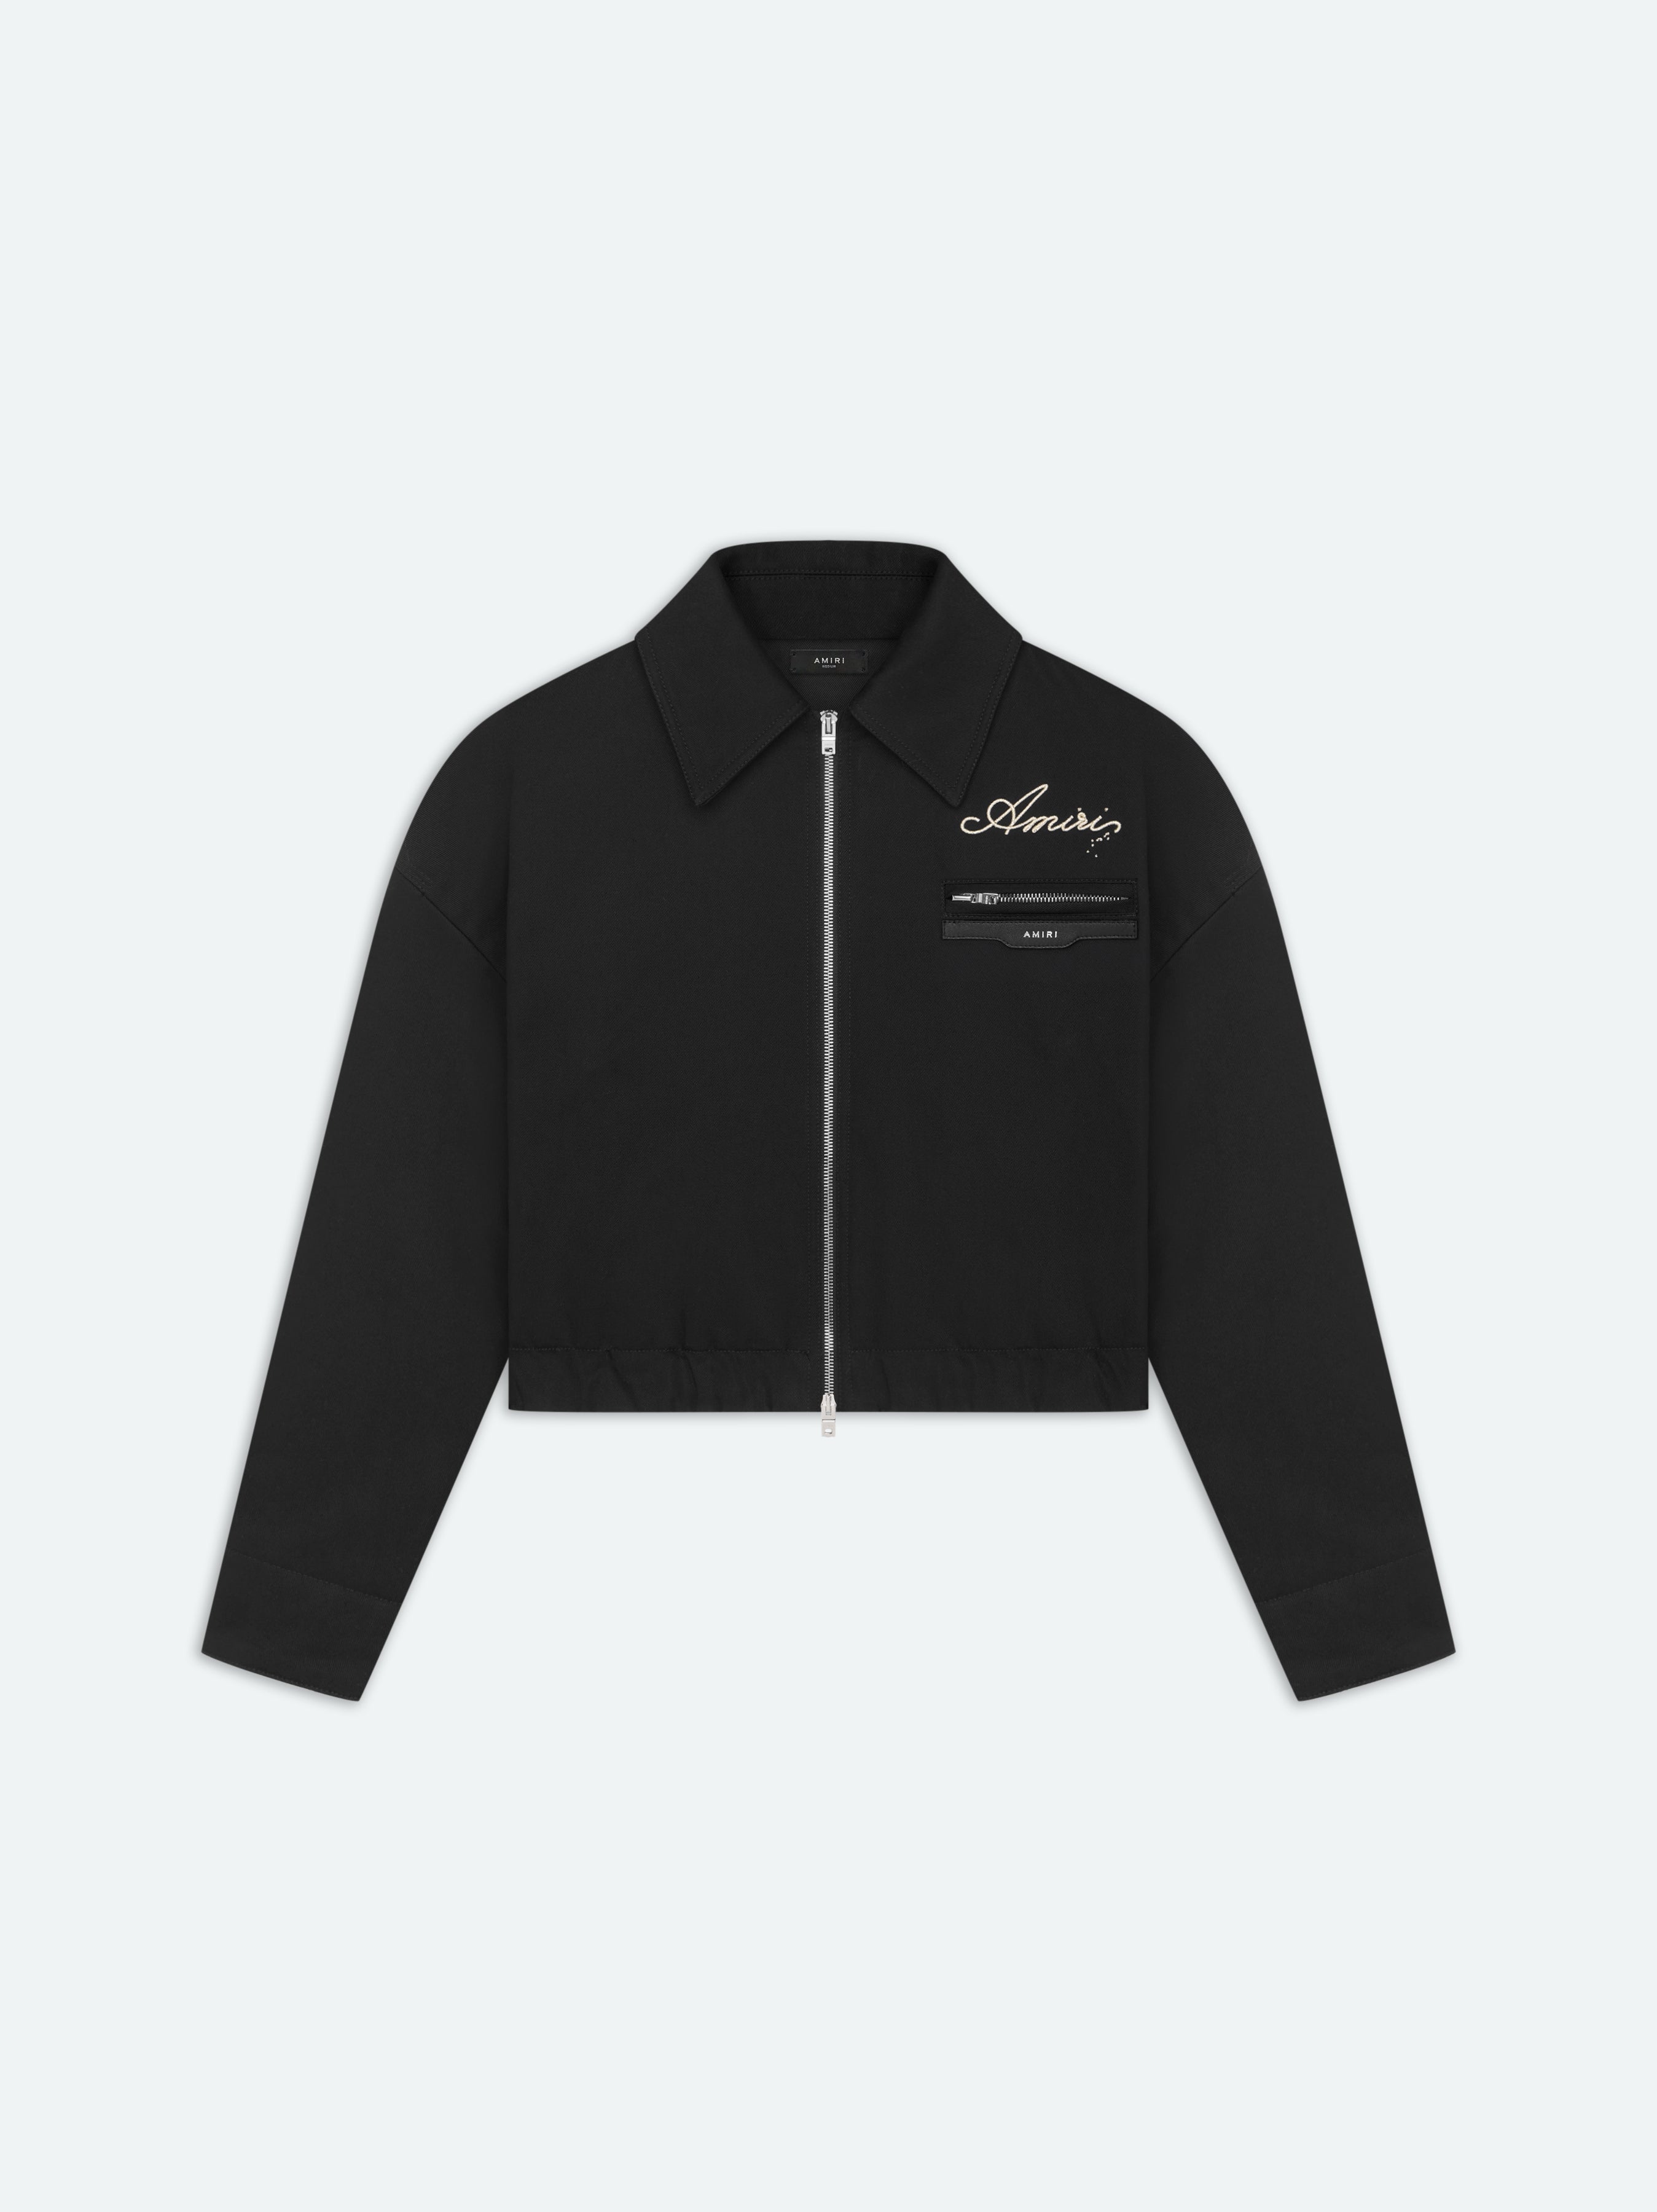 Product WOMEN - CHAMPAGNE WORKMAN JACKET - Black featured image